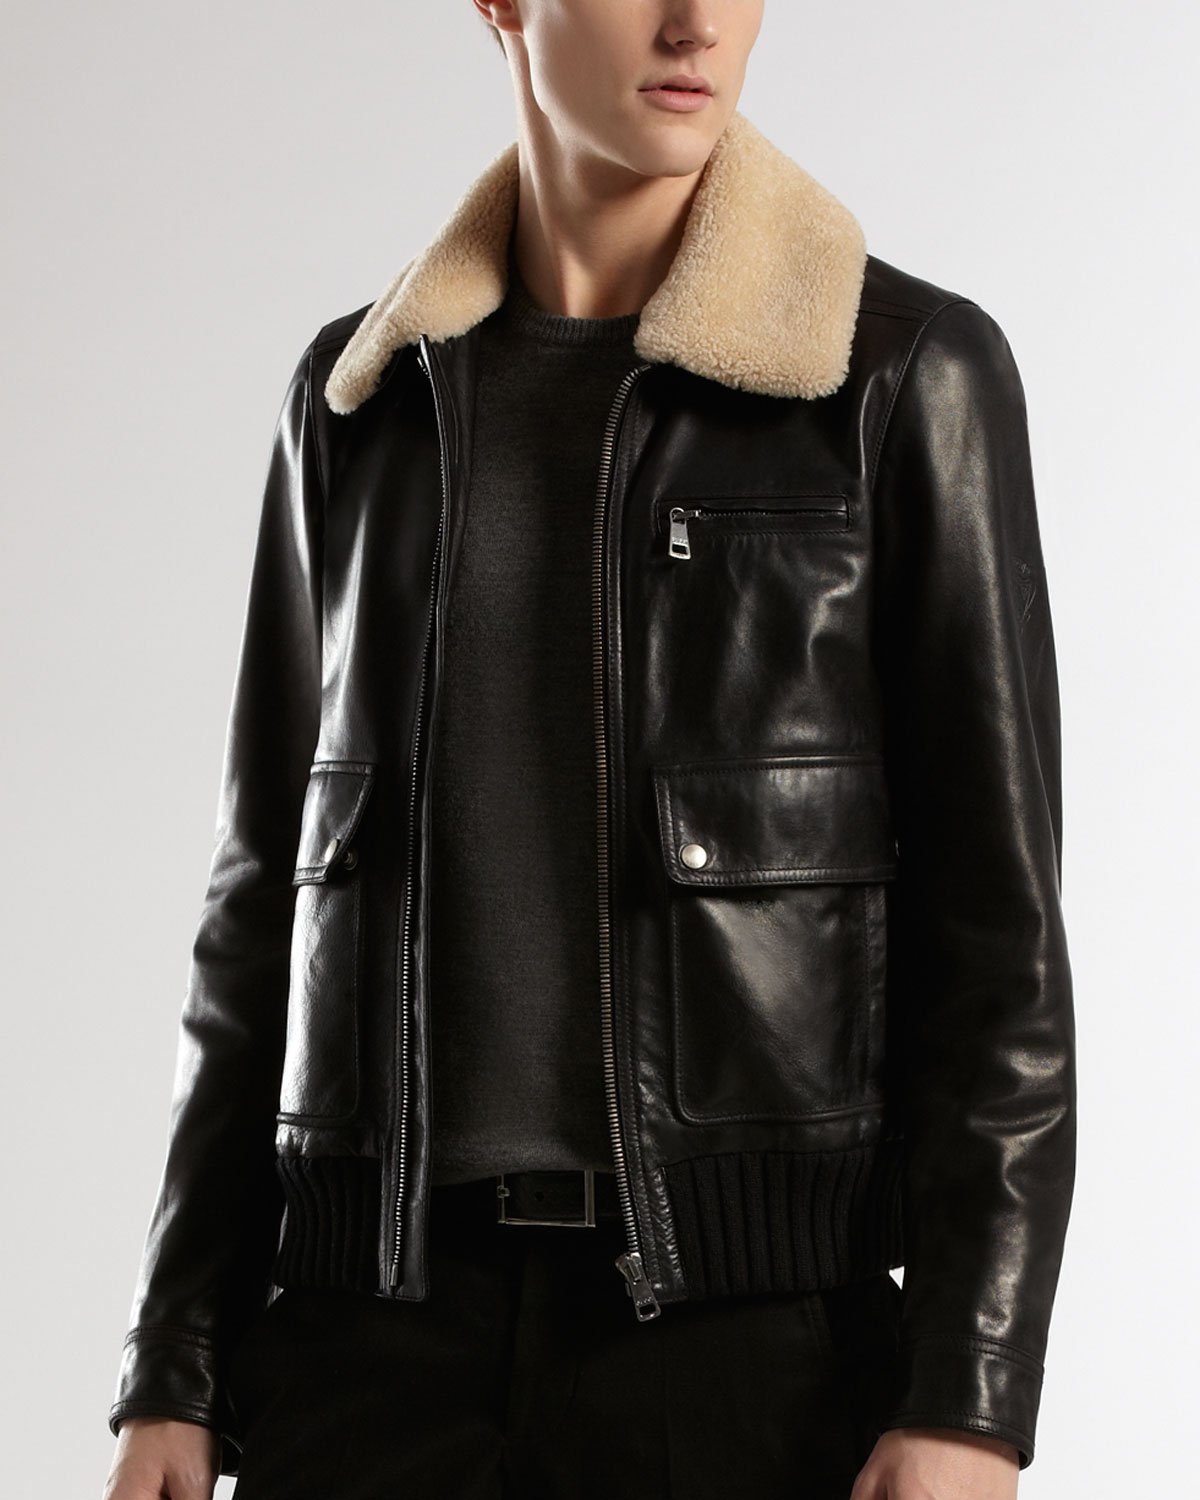 Lyst - Michael Kors Bomber Jacket with Detachable Shearling Collar in ...